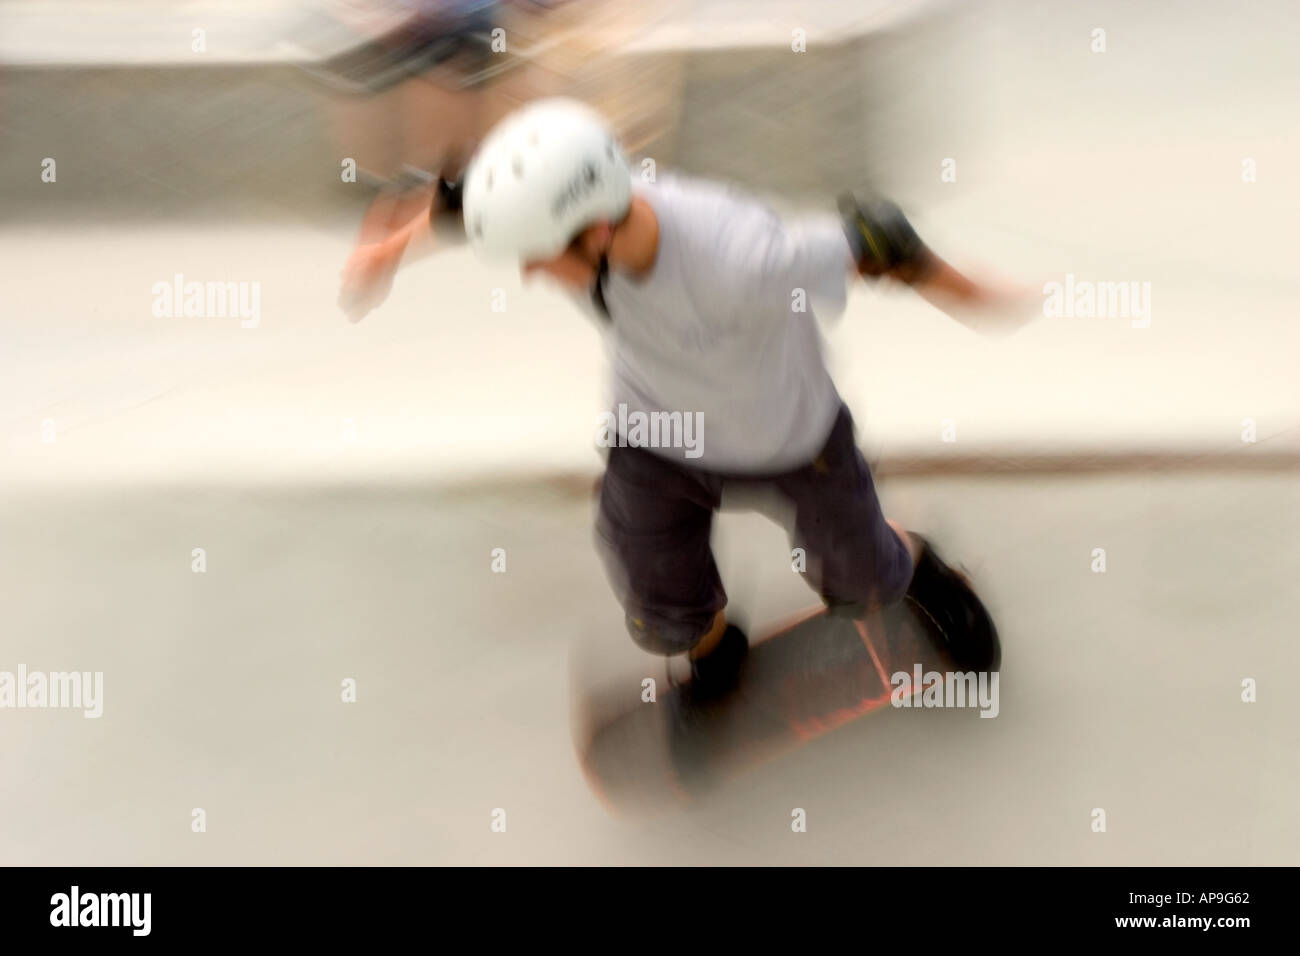 Dynamic motion blur image of a daring young man at a skateboard park. Stock Photo